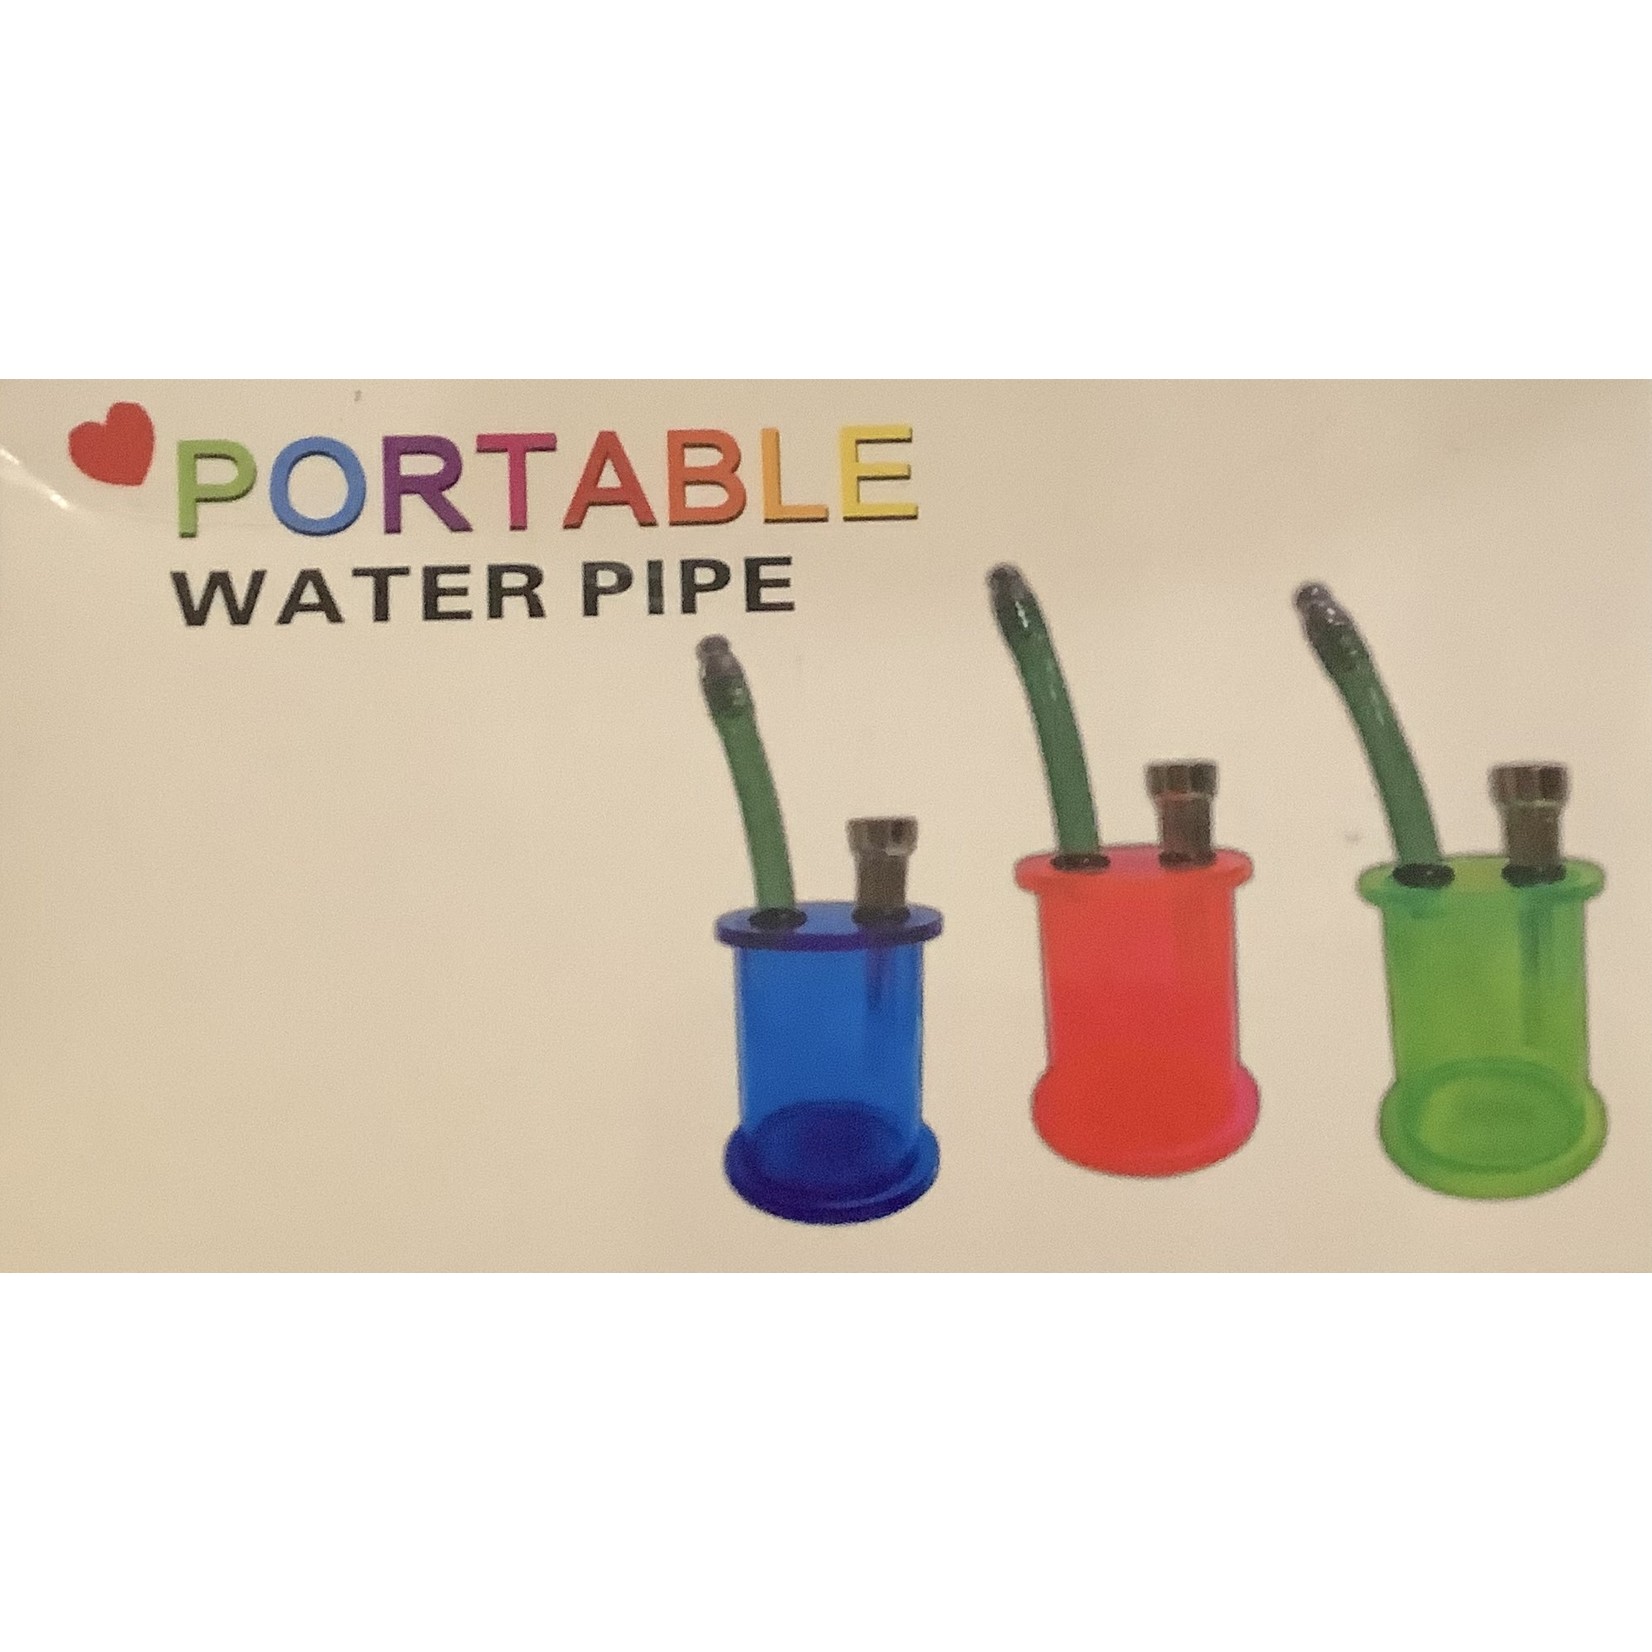 Portable Water Pipes-Assorted Colors